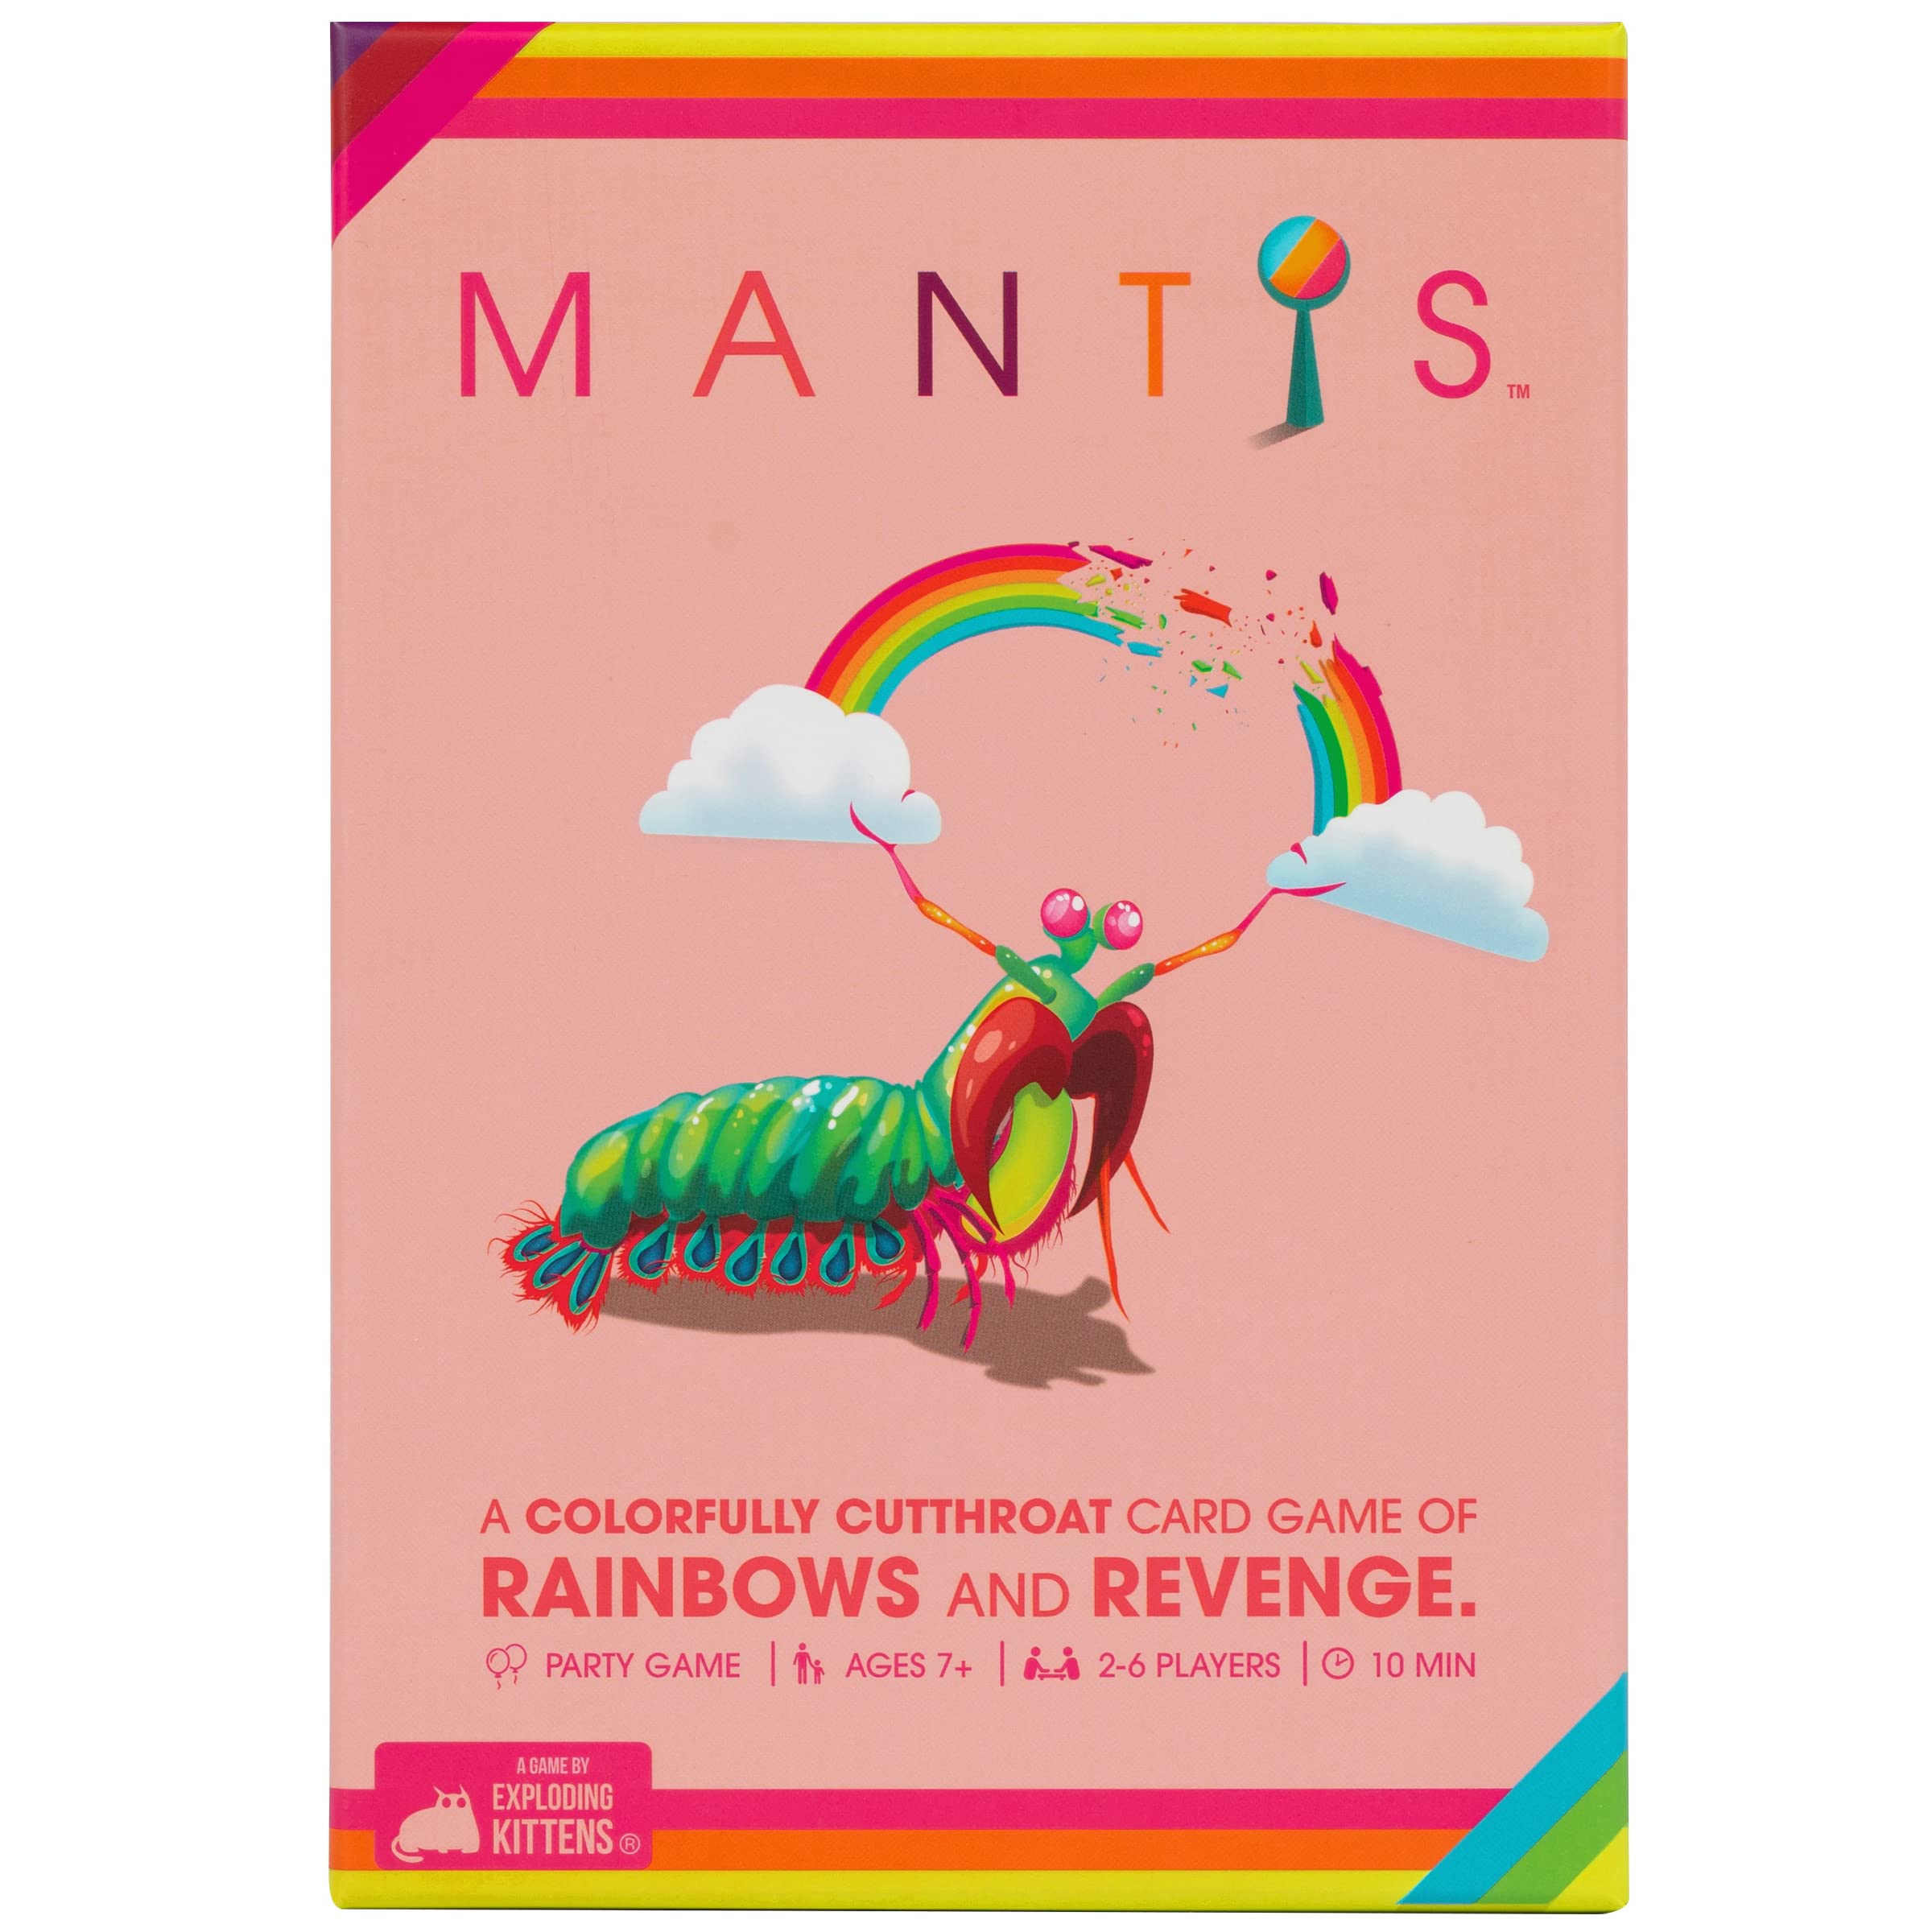 Mantis Matching Card Game by Exploding Kittens $11.97